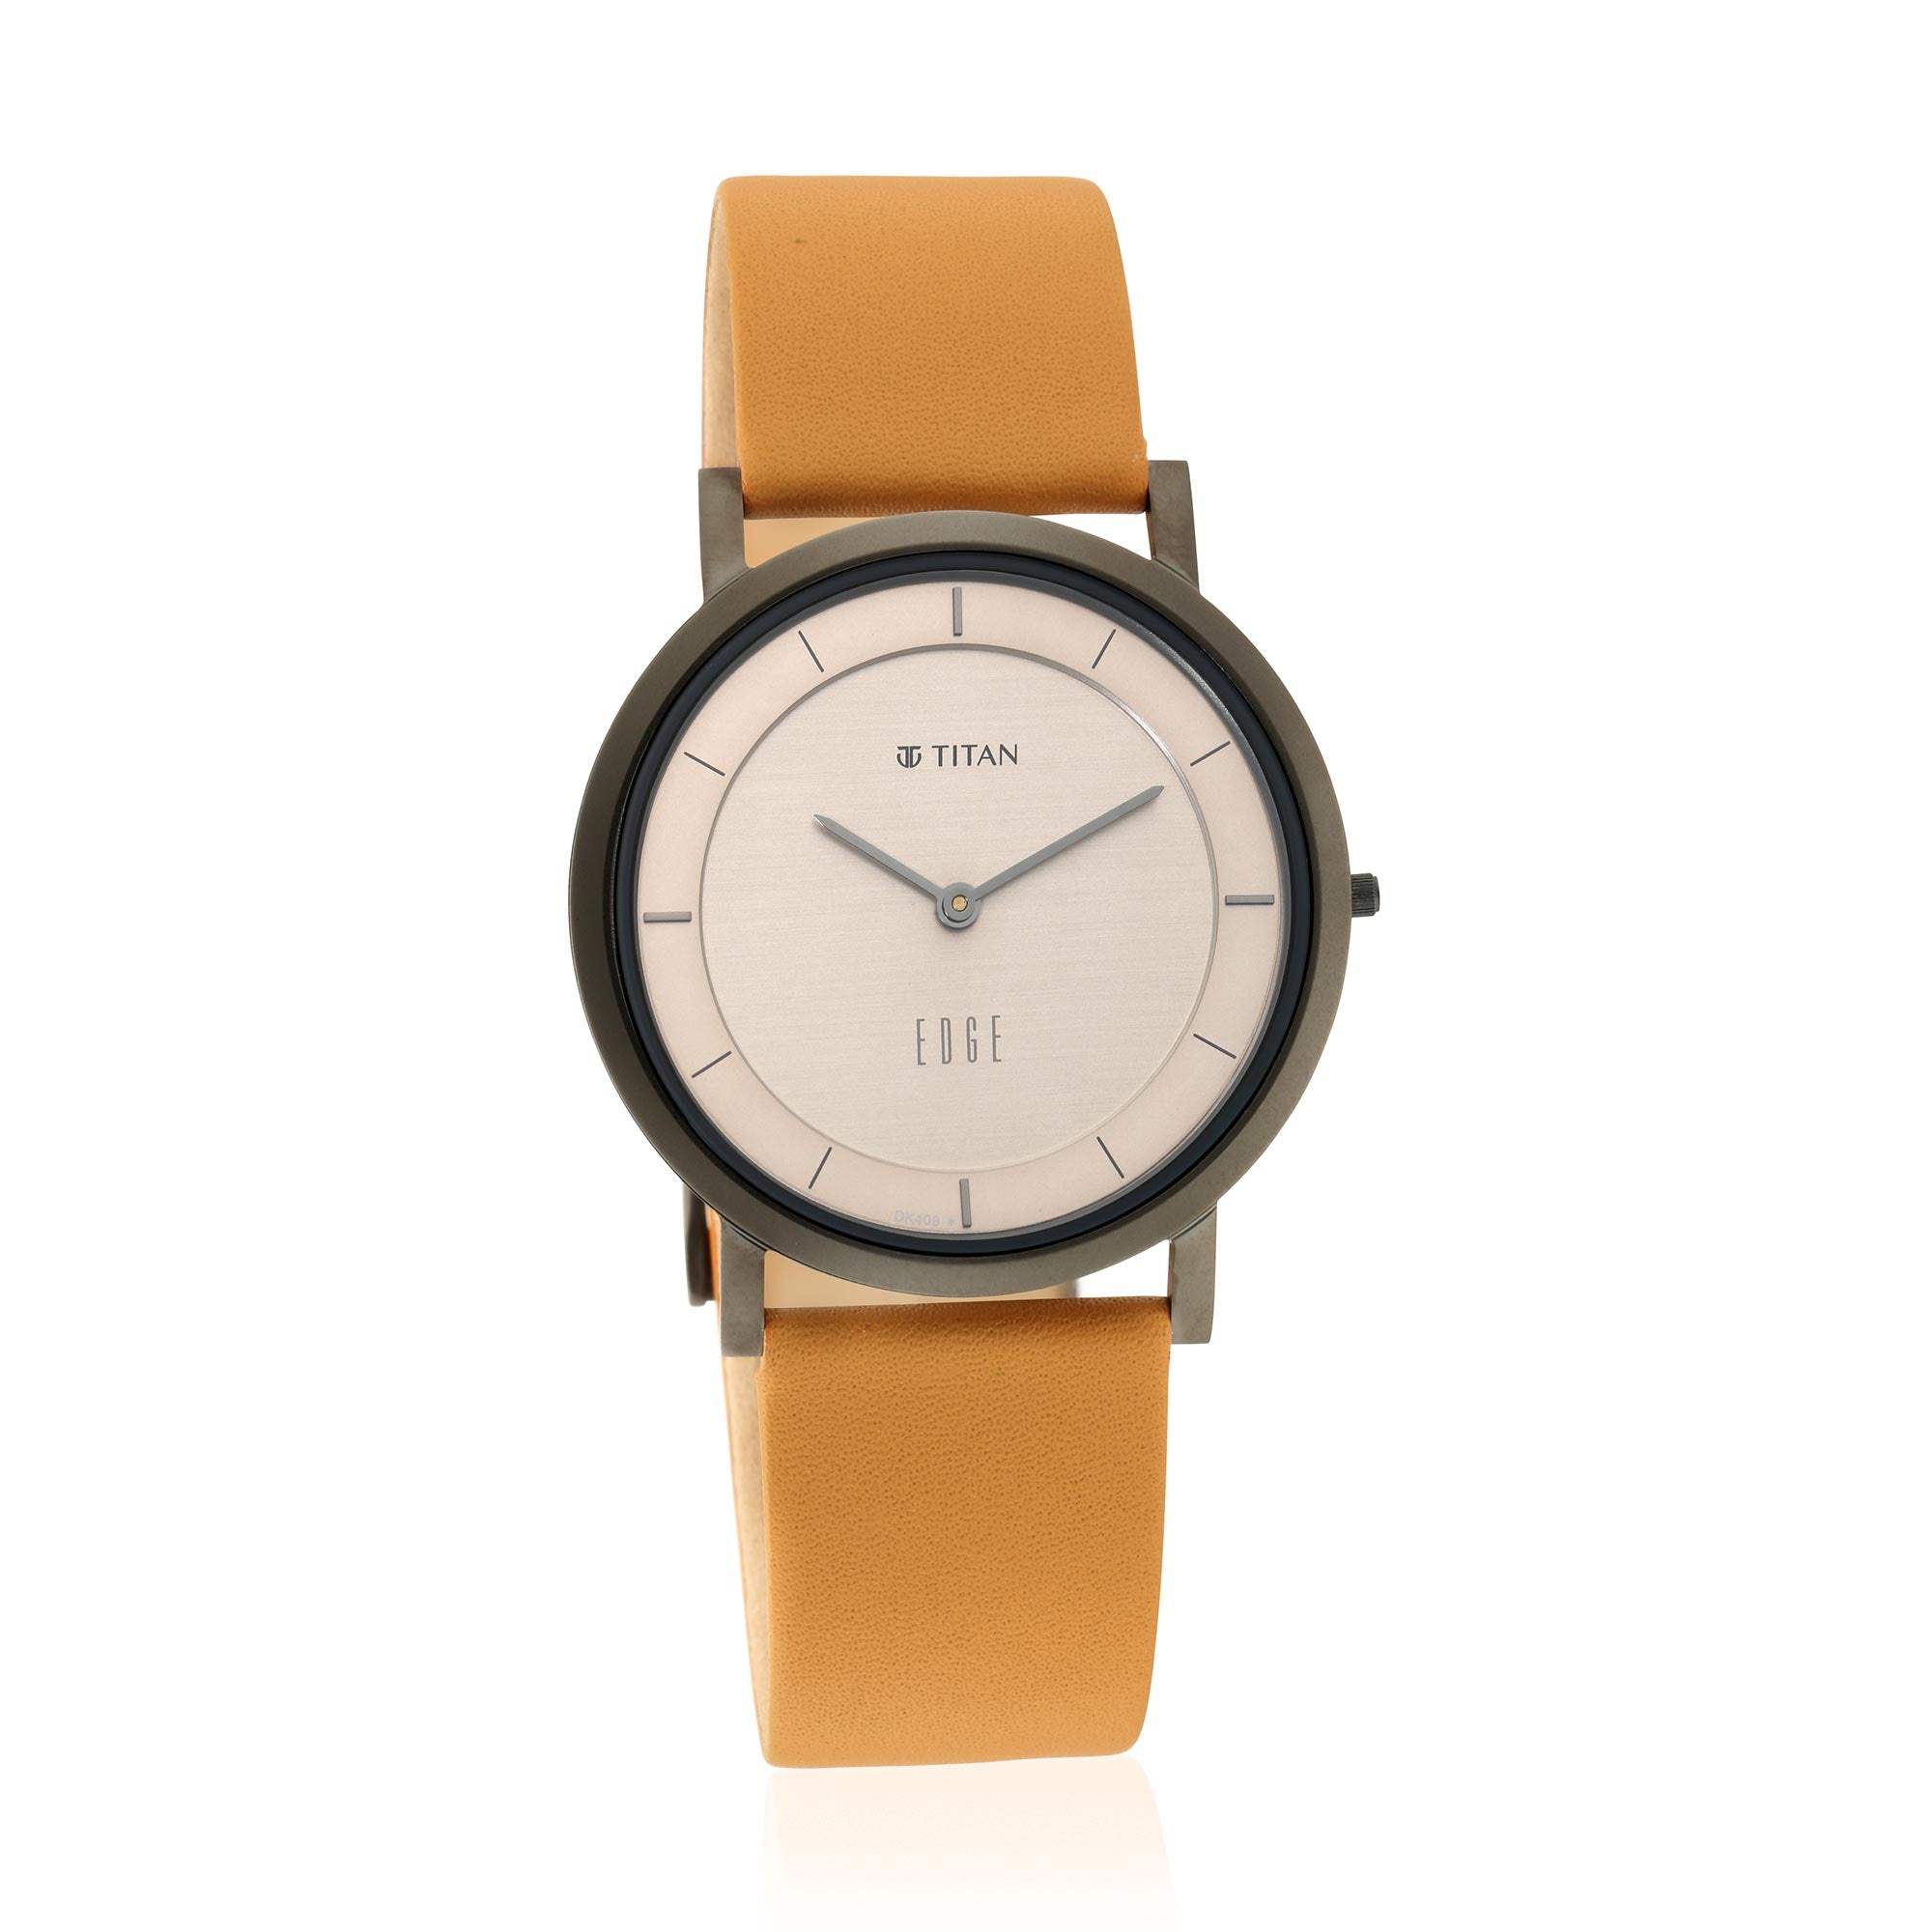 Titan Edge Beige Dial Analog Leather Strap watch for Men